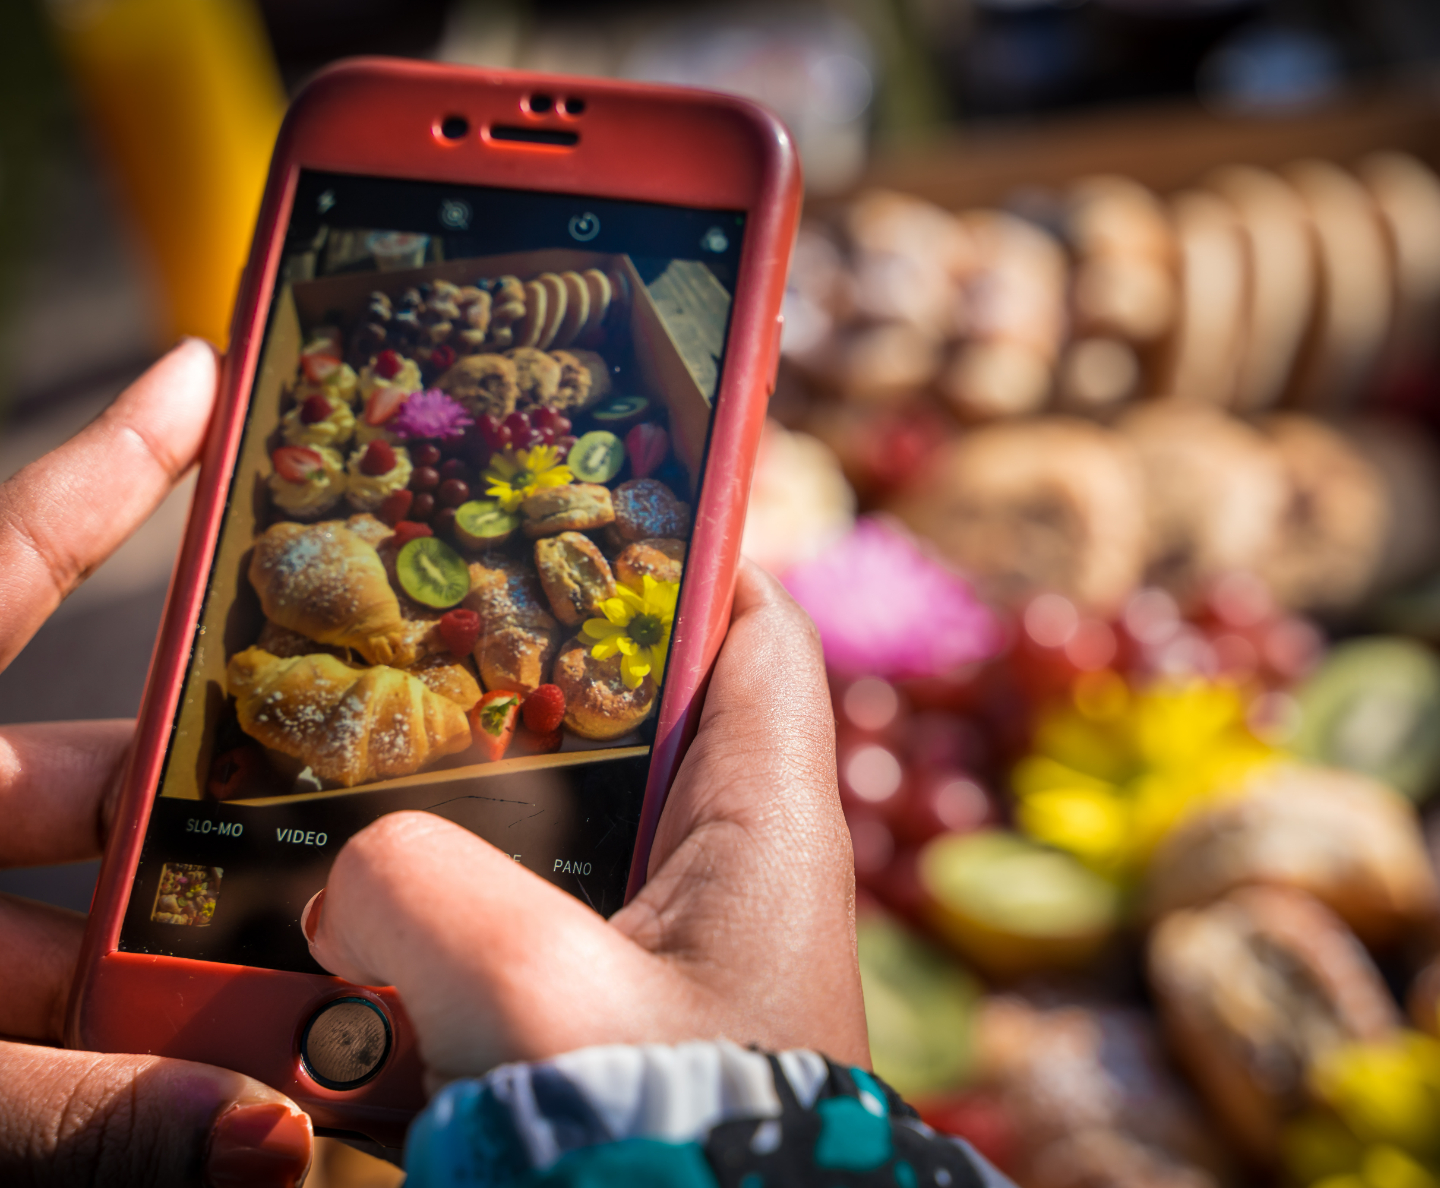 A phone taking photos of veg and fruit